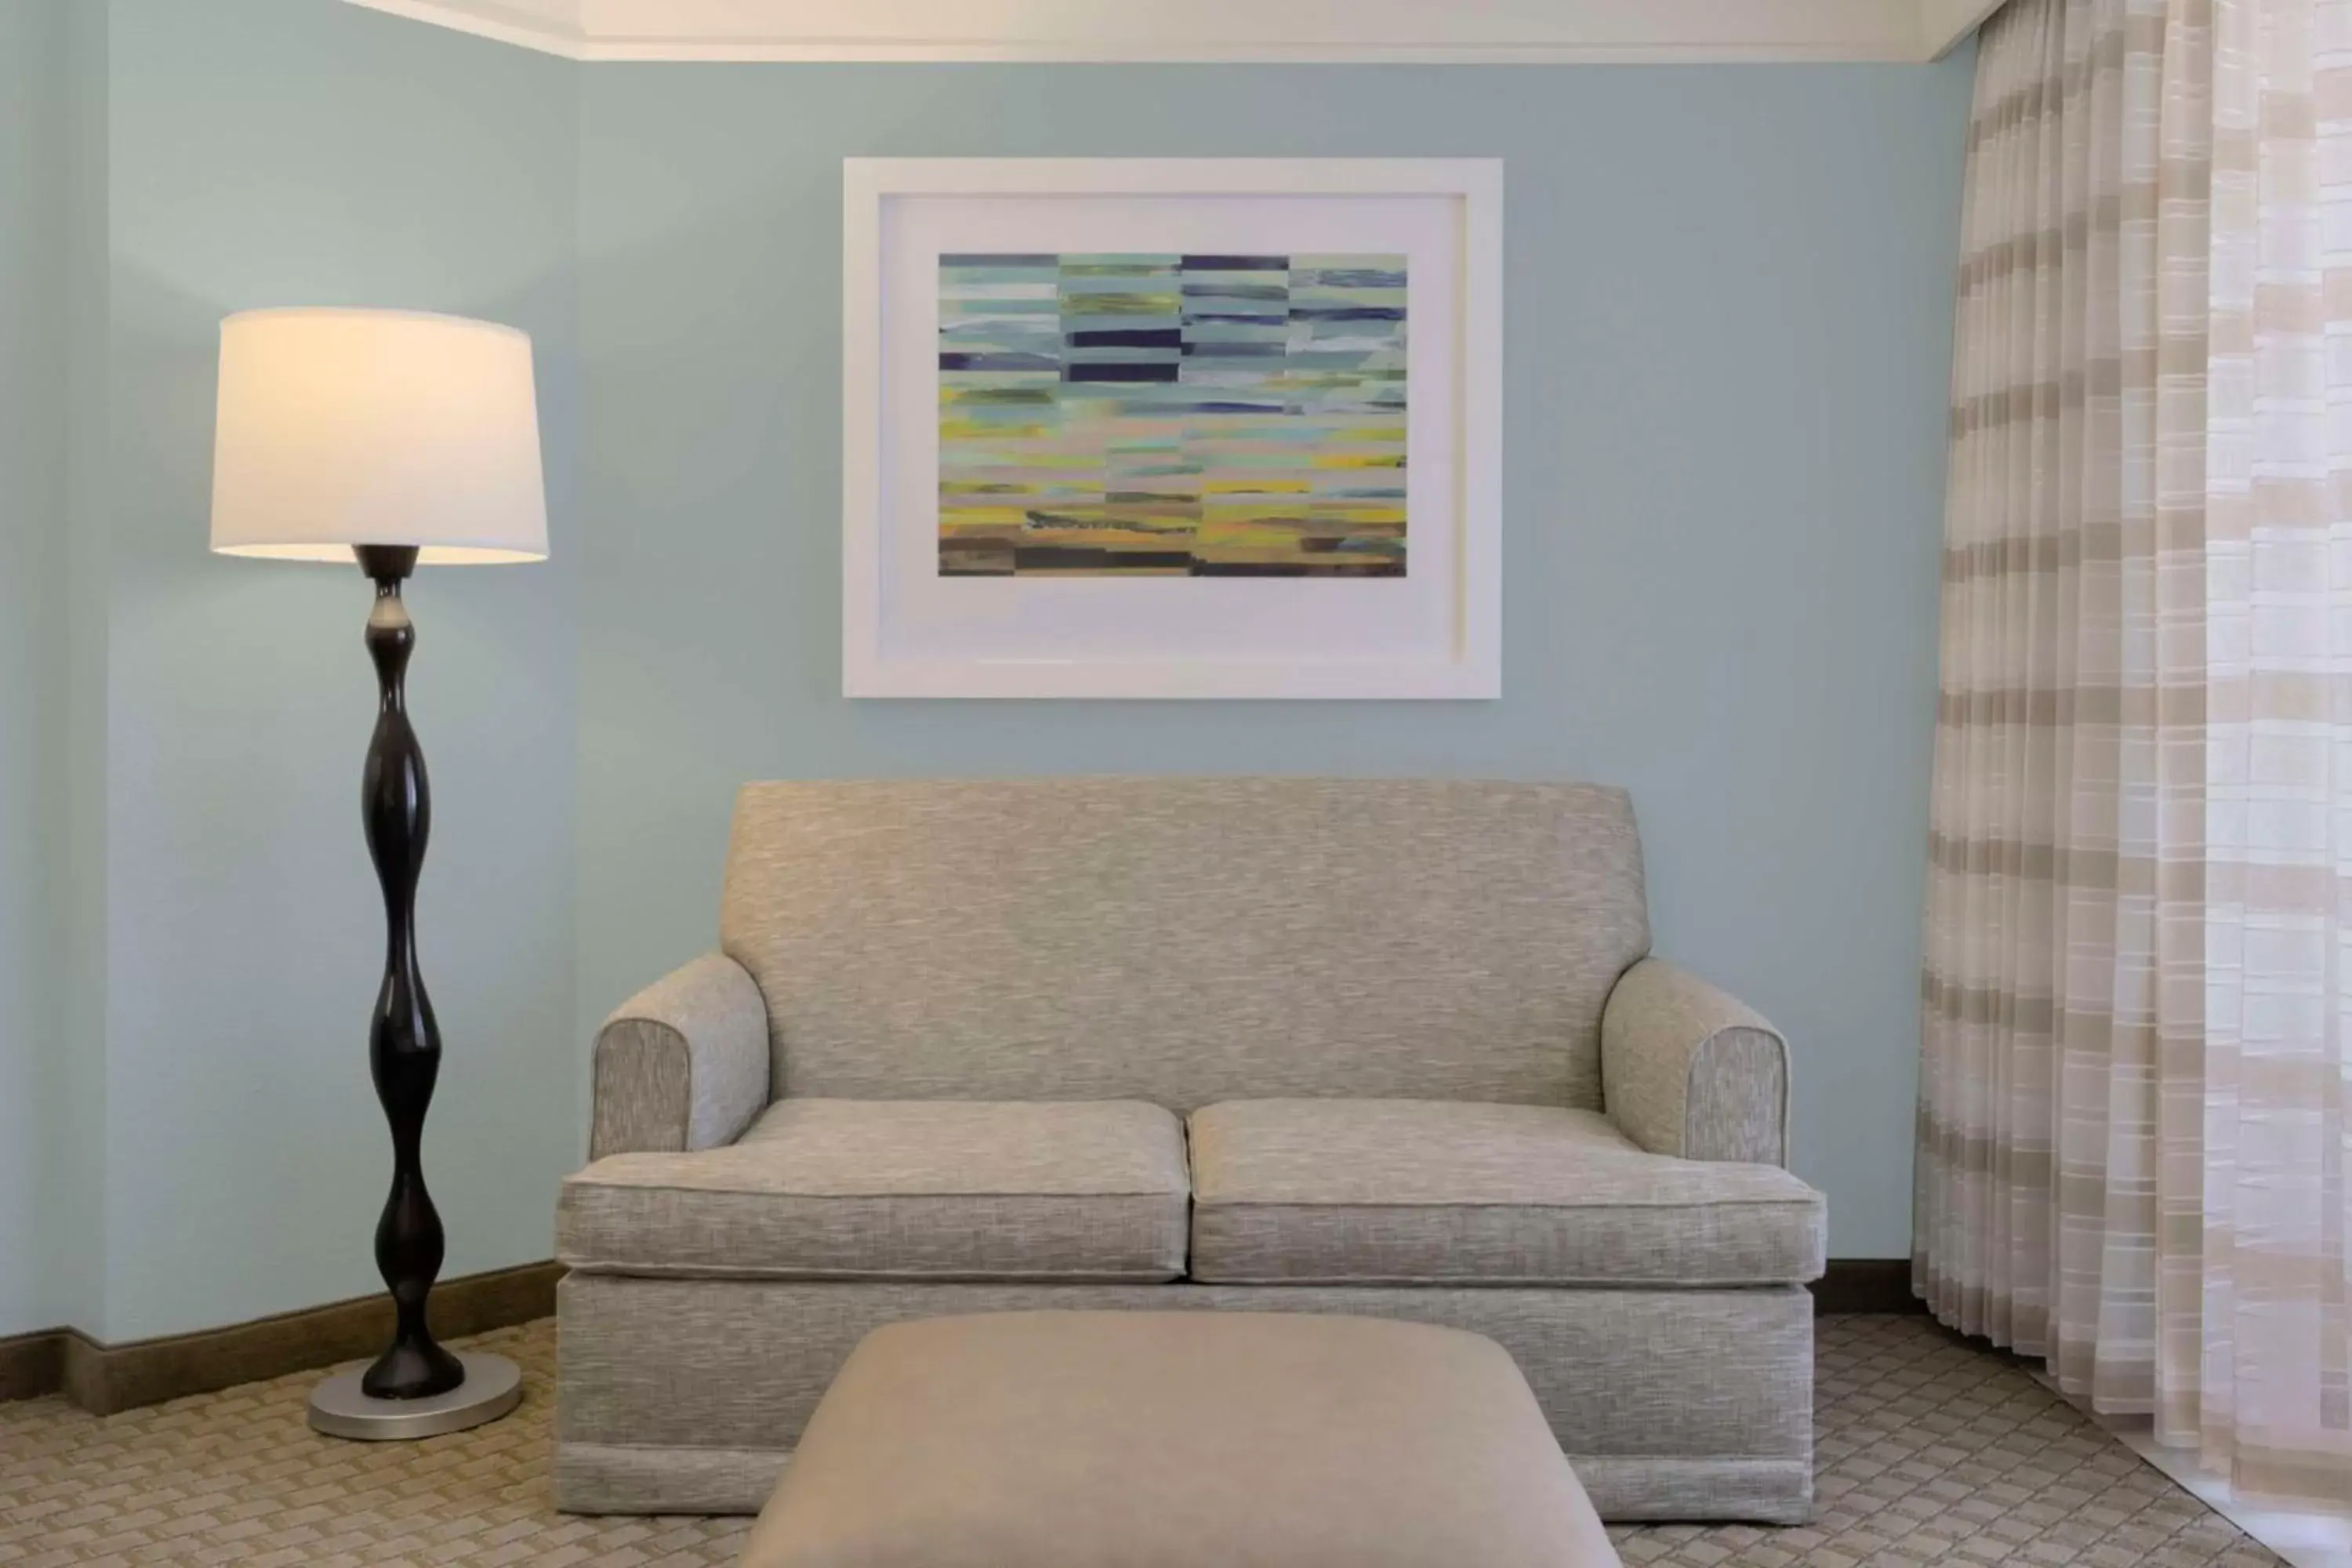 Deluxe King Junior Suite with Partial View in Hilton Sandestin Beach Golf Resort & Spa